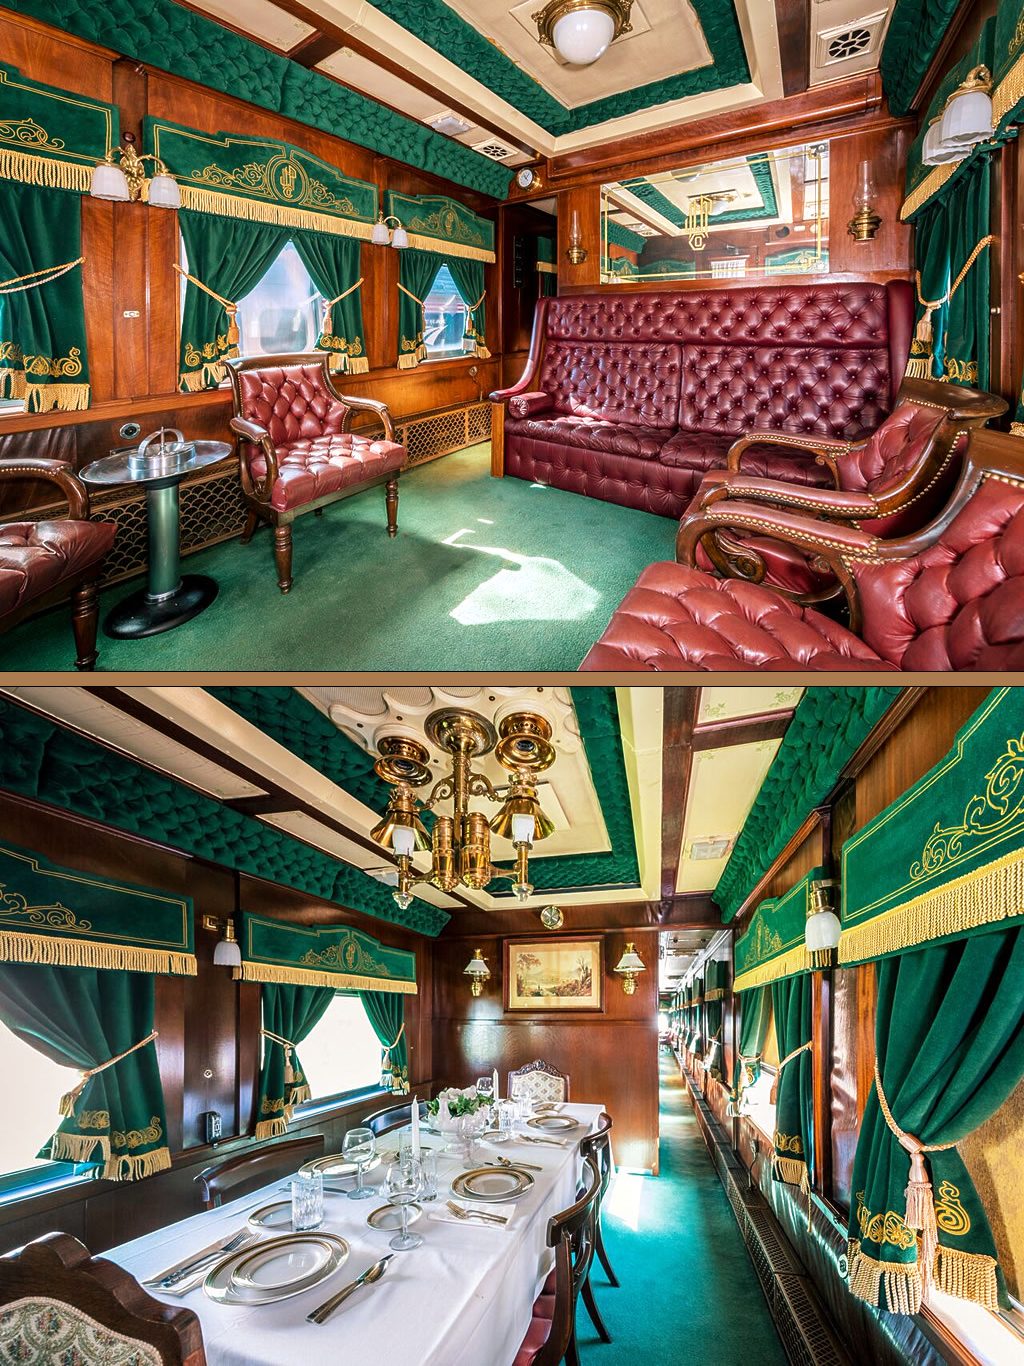 A collage of photographs showcasing the luxury interior of a train car. The interior is decorated with rich green curtains, plush red seat, and ornate gold fixtures. In one of the photographs a table is seen, set with a white tablecloth and china dishes.